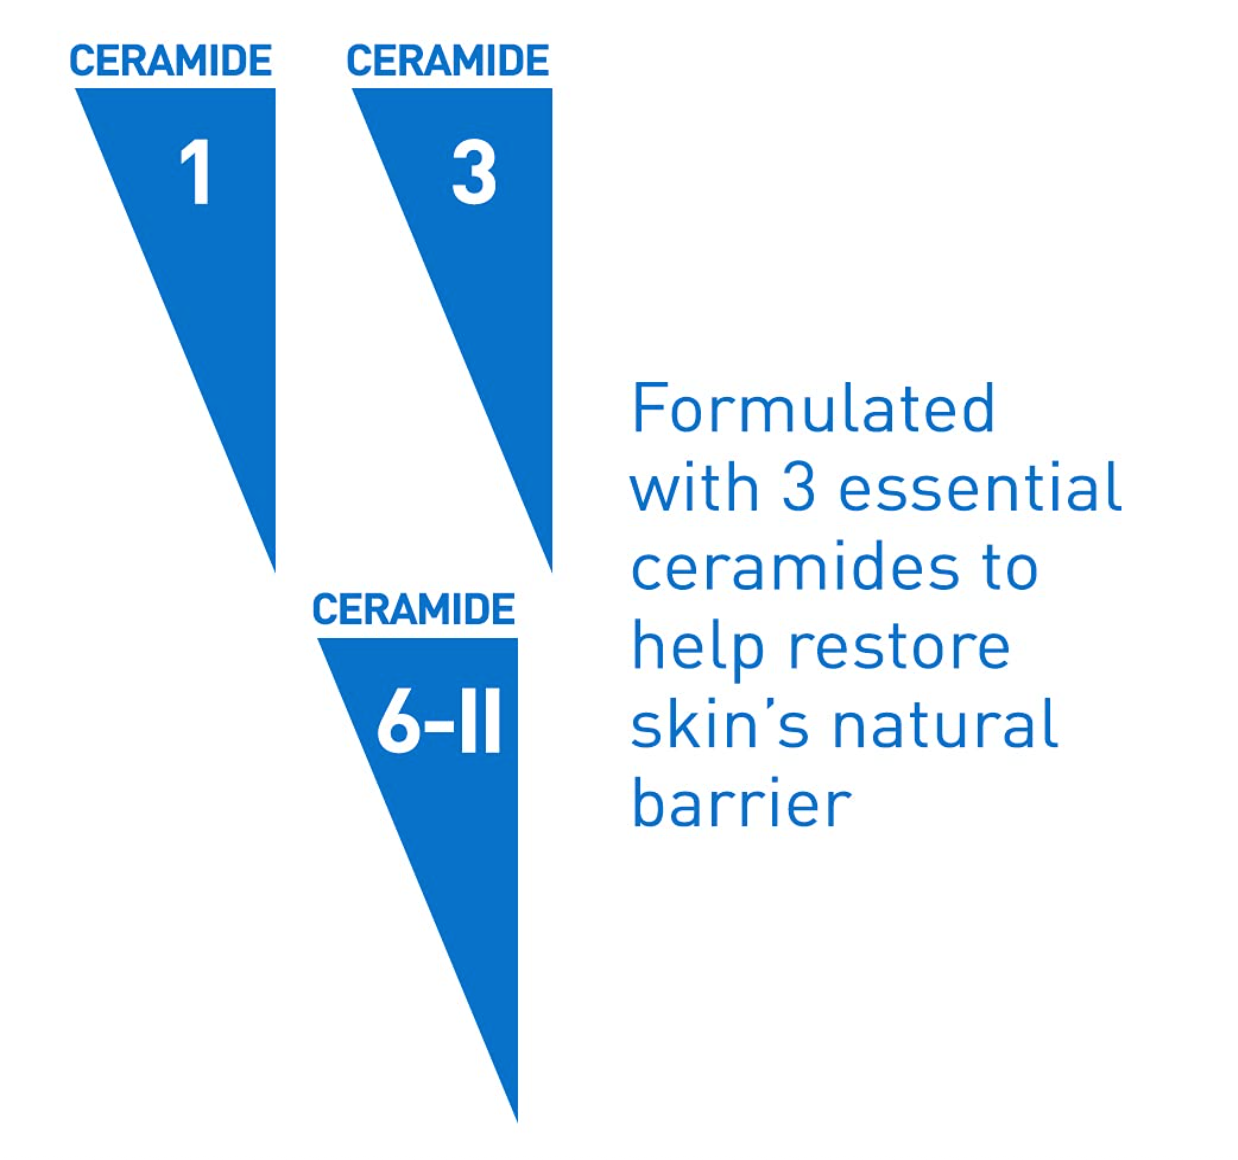 CeraVe 100% Mineral Sunscreen SPF 30 | Face Sunscreen with Zinc Oxide & Titanium Dioxide for Sensitive Skin | With Hyaluronic Acid, Niacinamide, and Ceramides | 2.5 oz